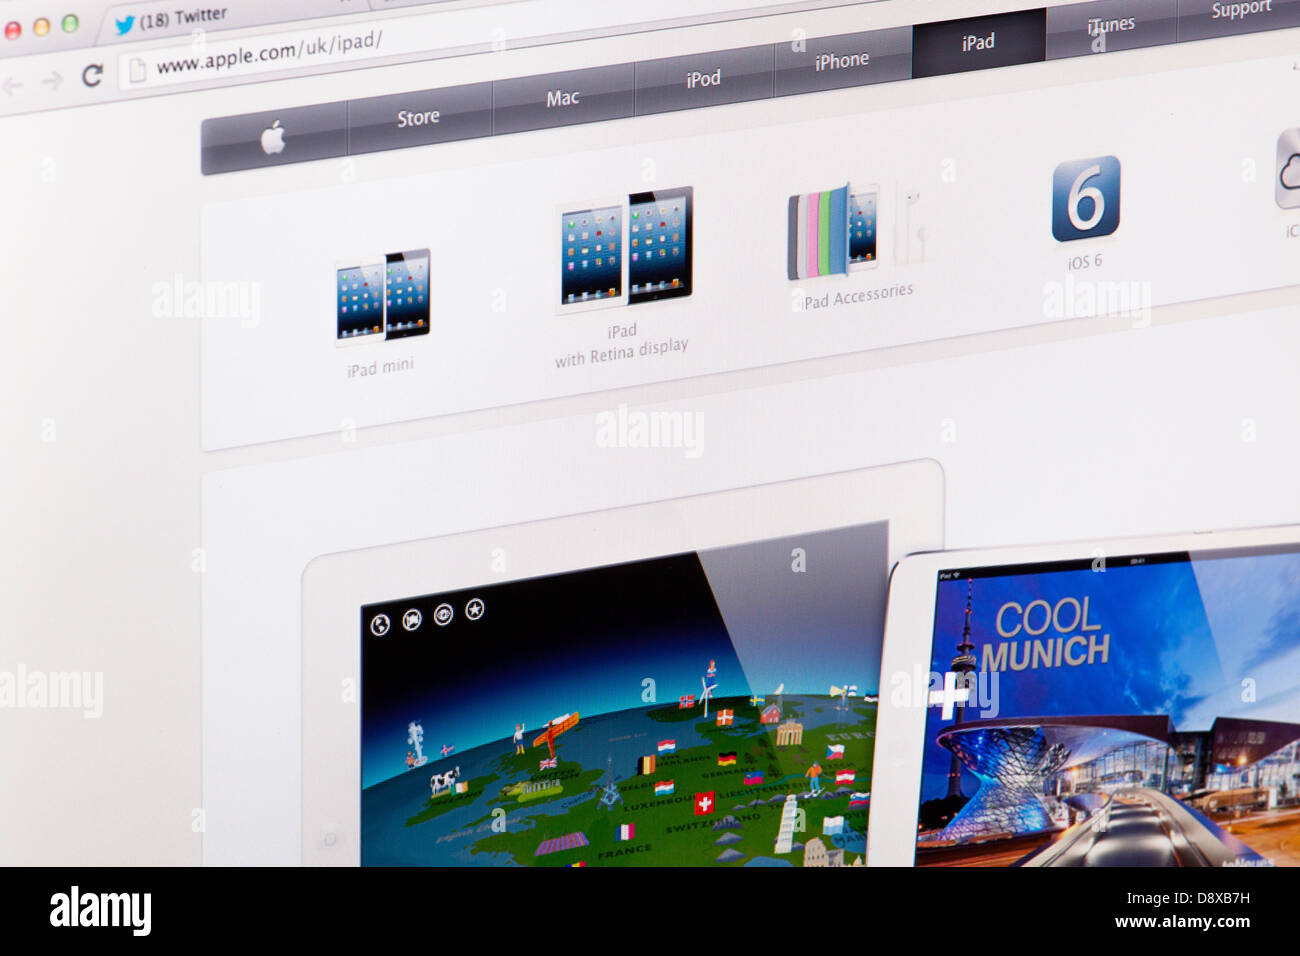 Apple Store Website or web page on a laptop screen or computer monitor Stock Photo